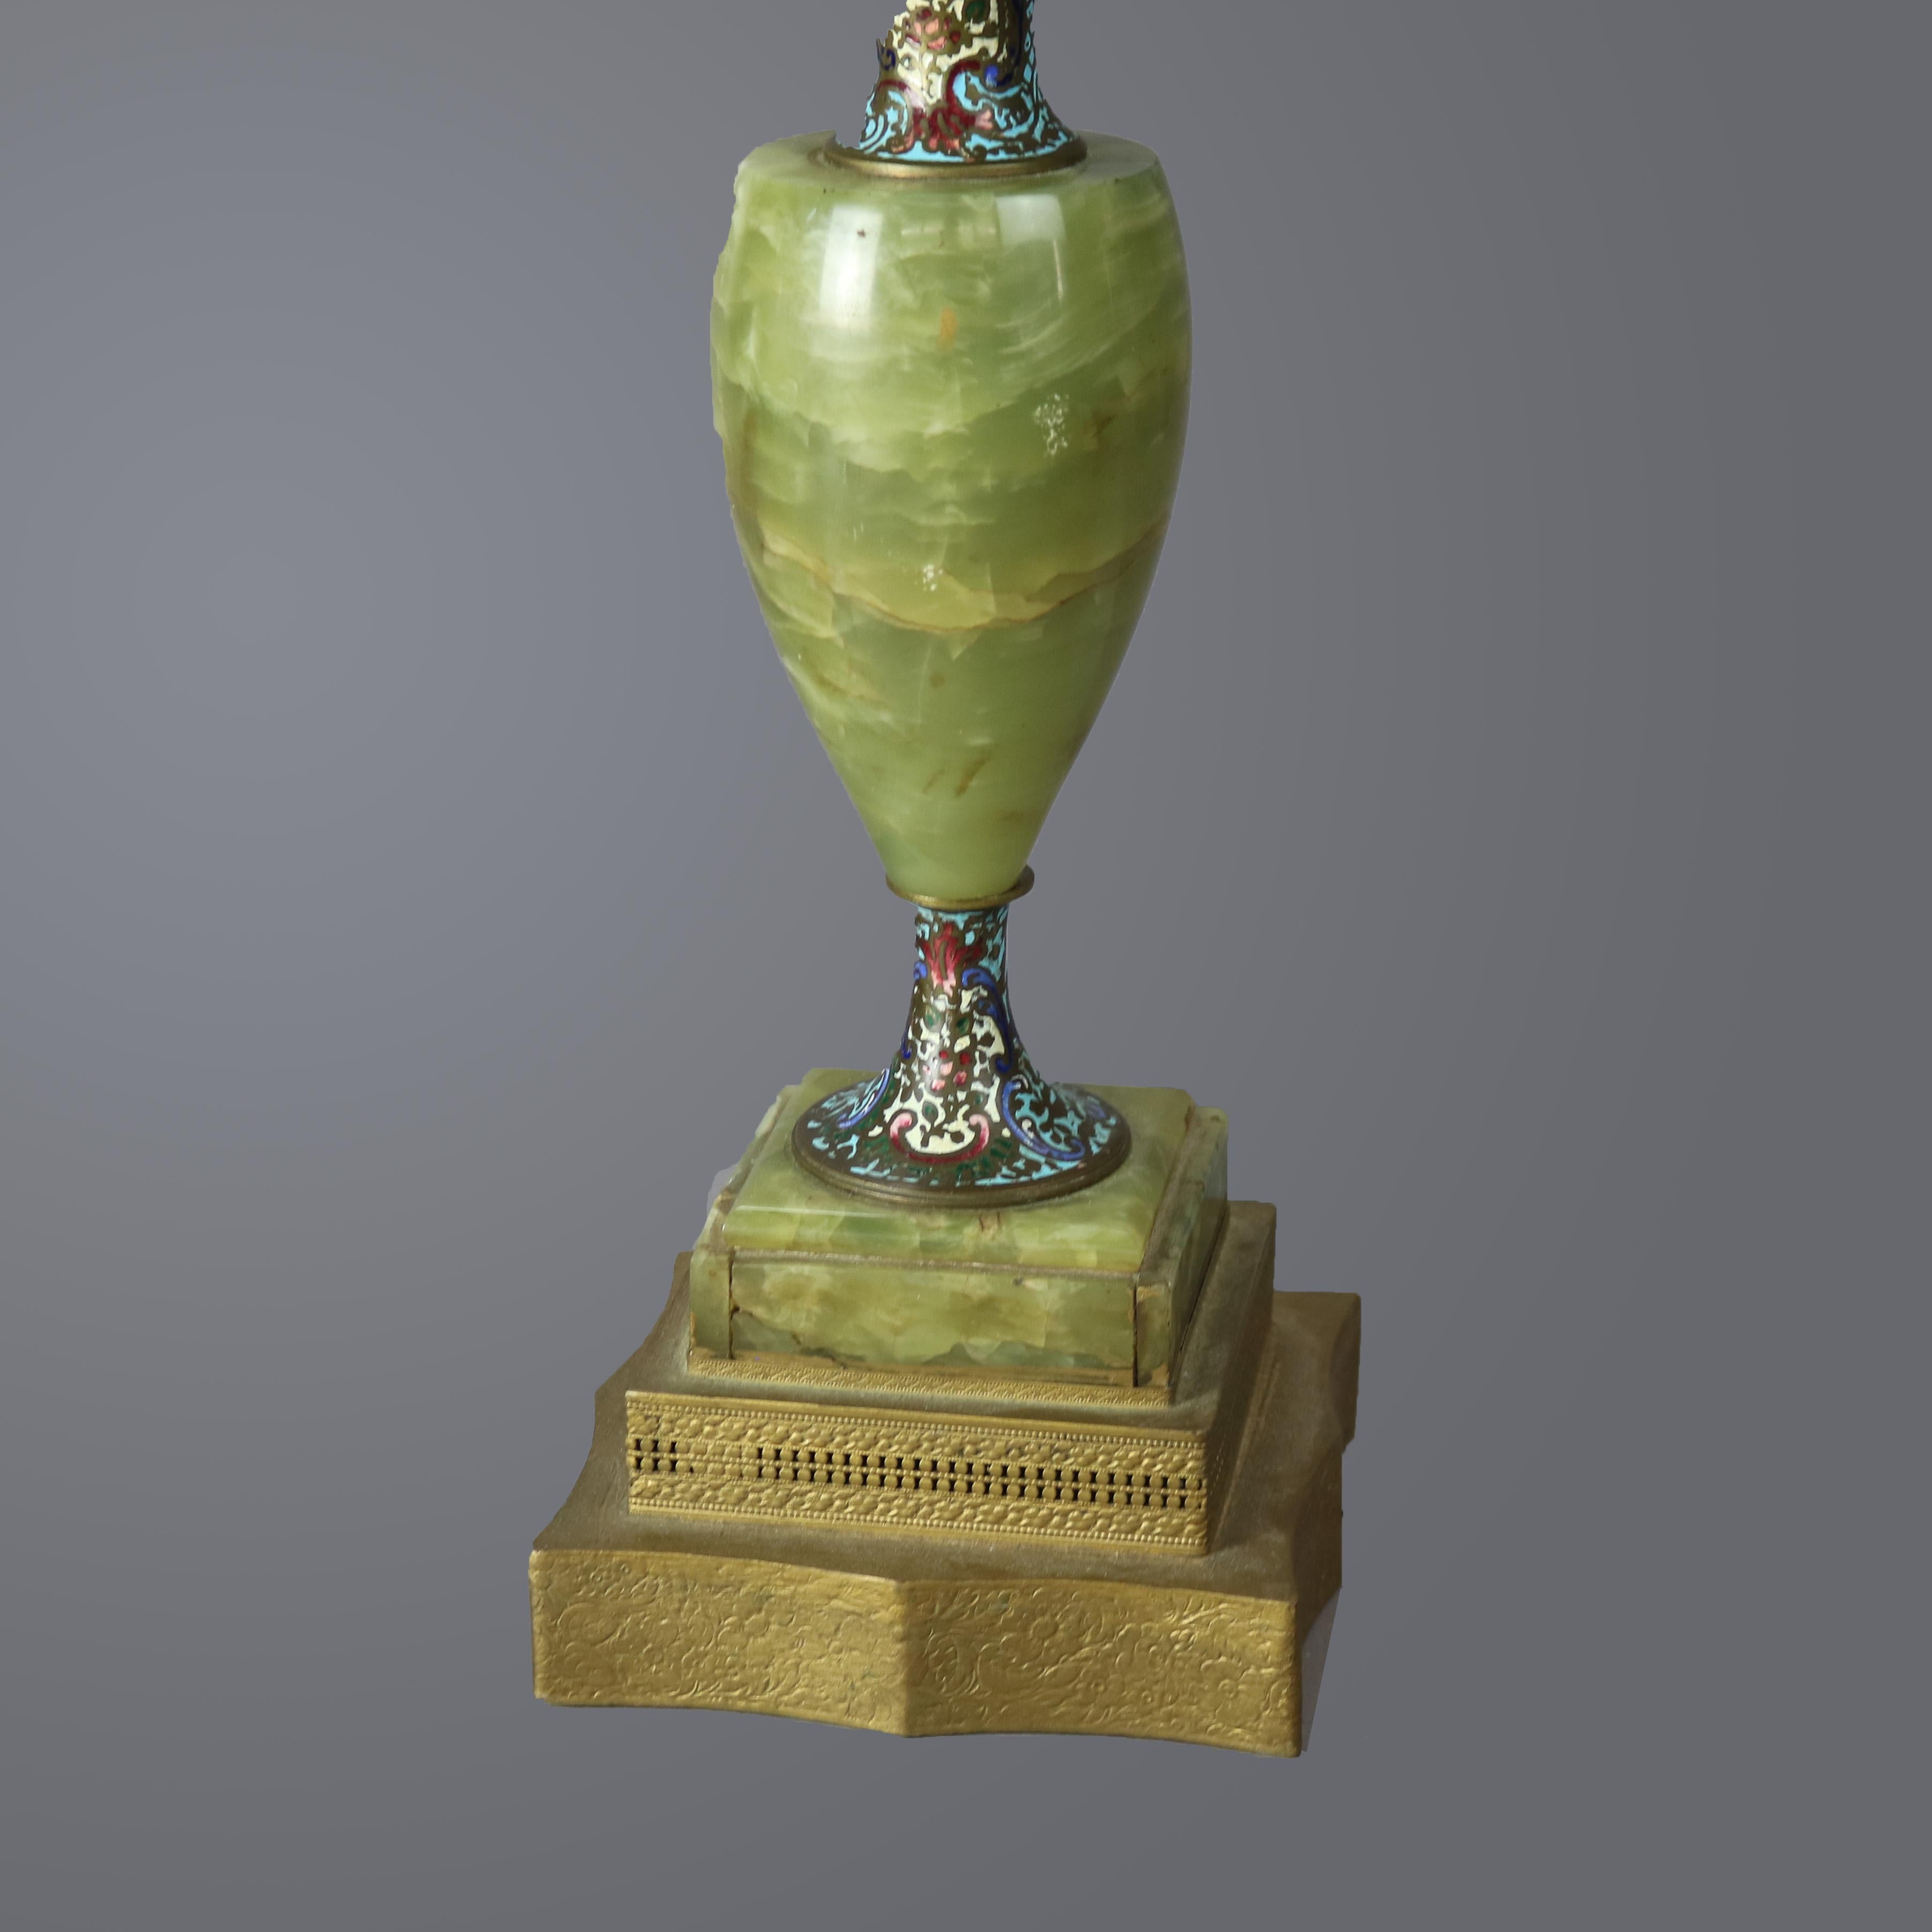 An antique pair of table lamps offers onyx urn form base with champleve neck and pedestal, c1920

Measures - 26.5